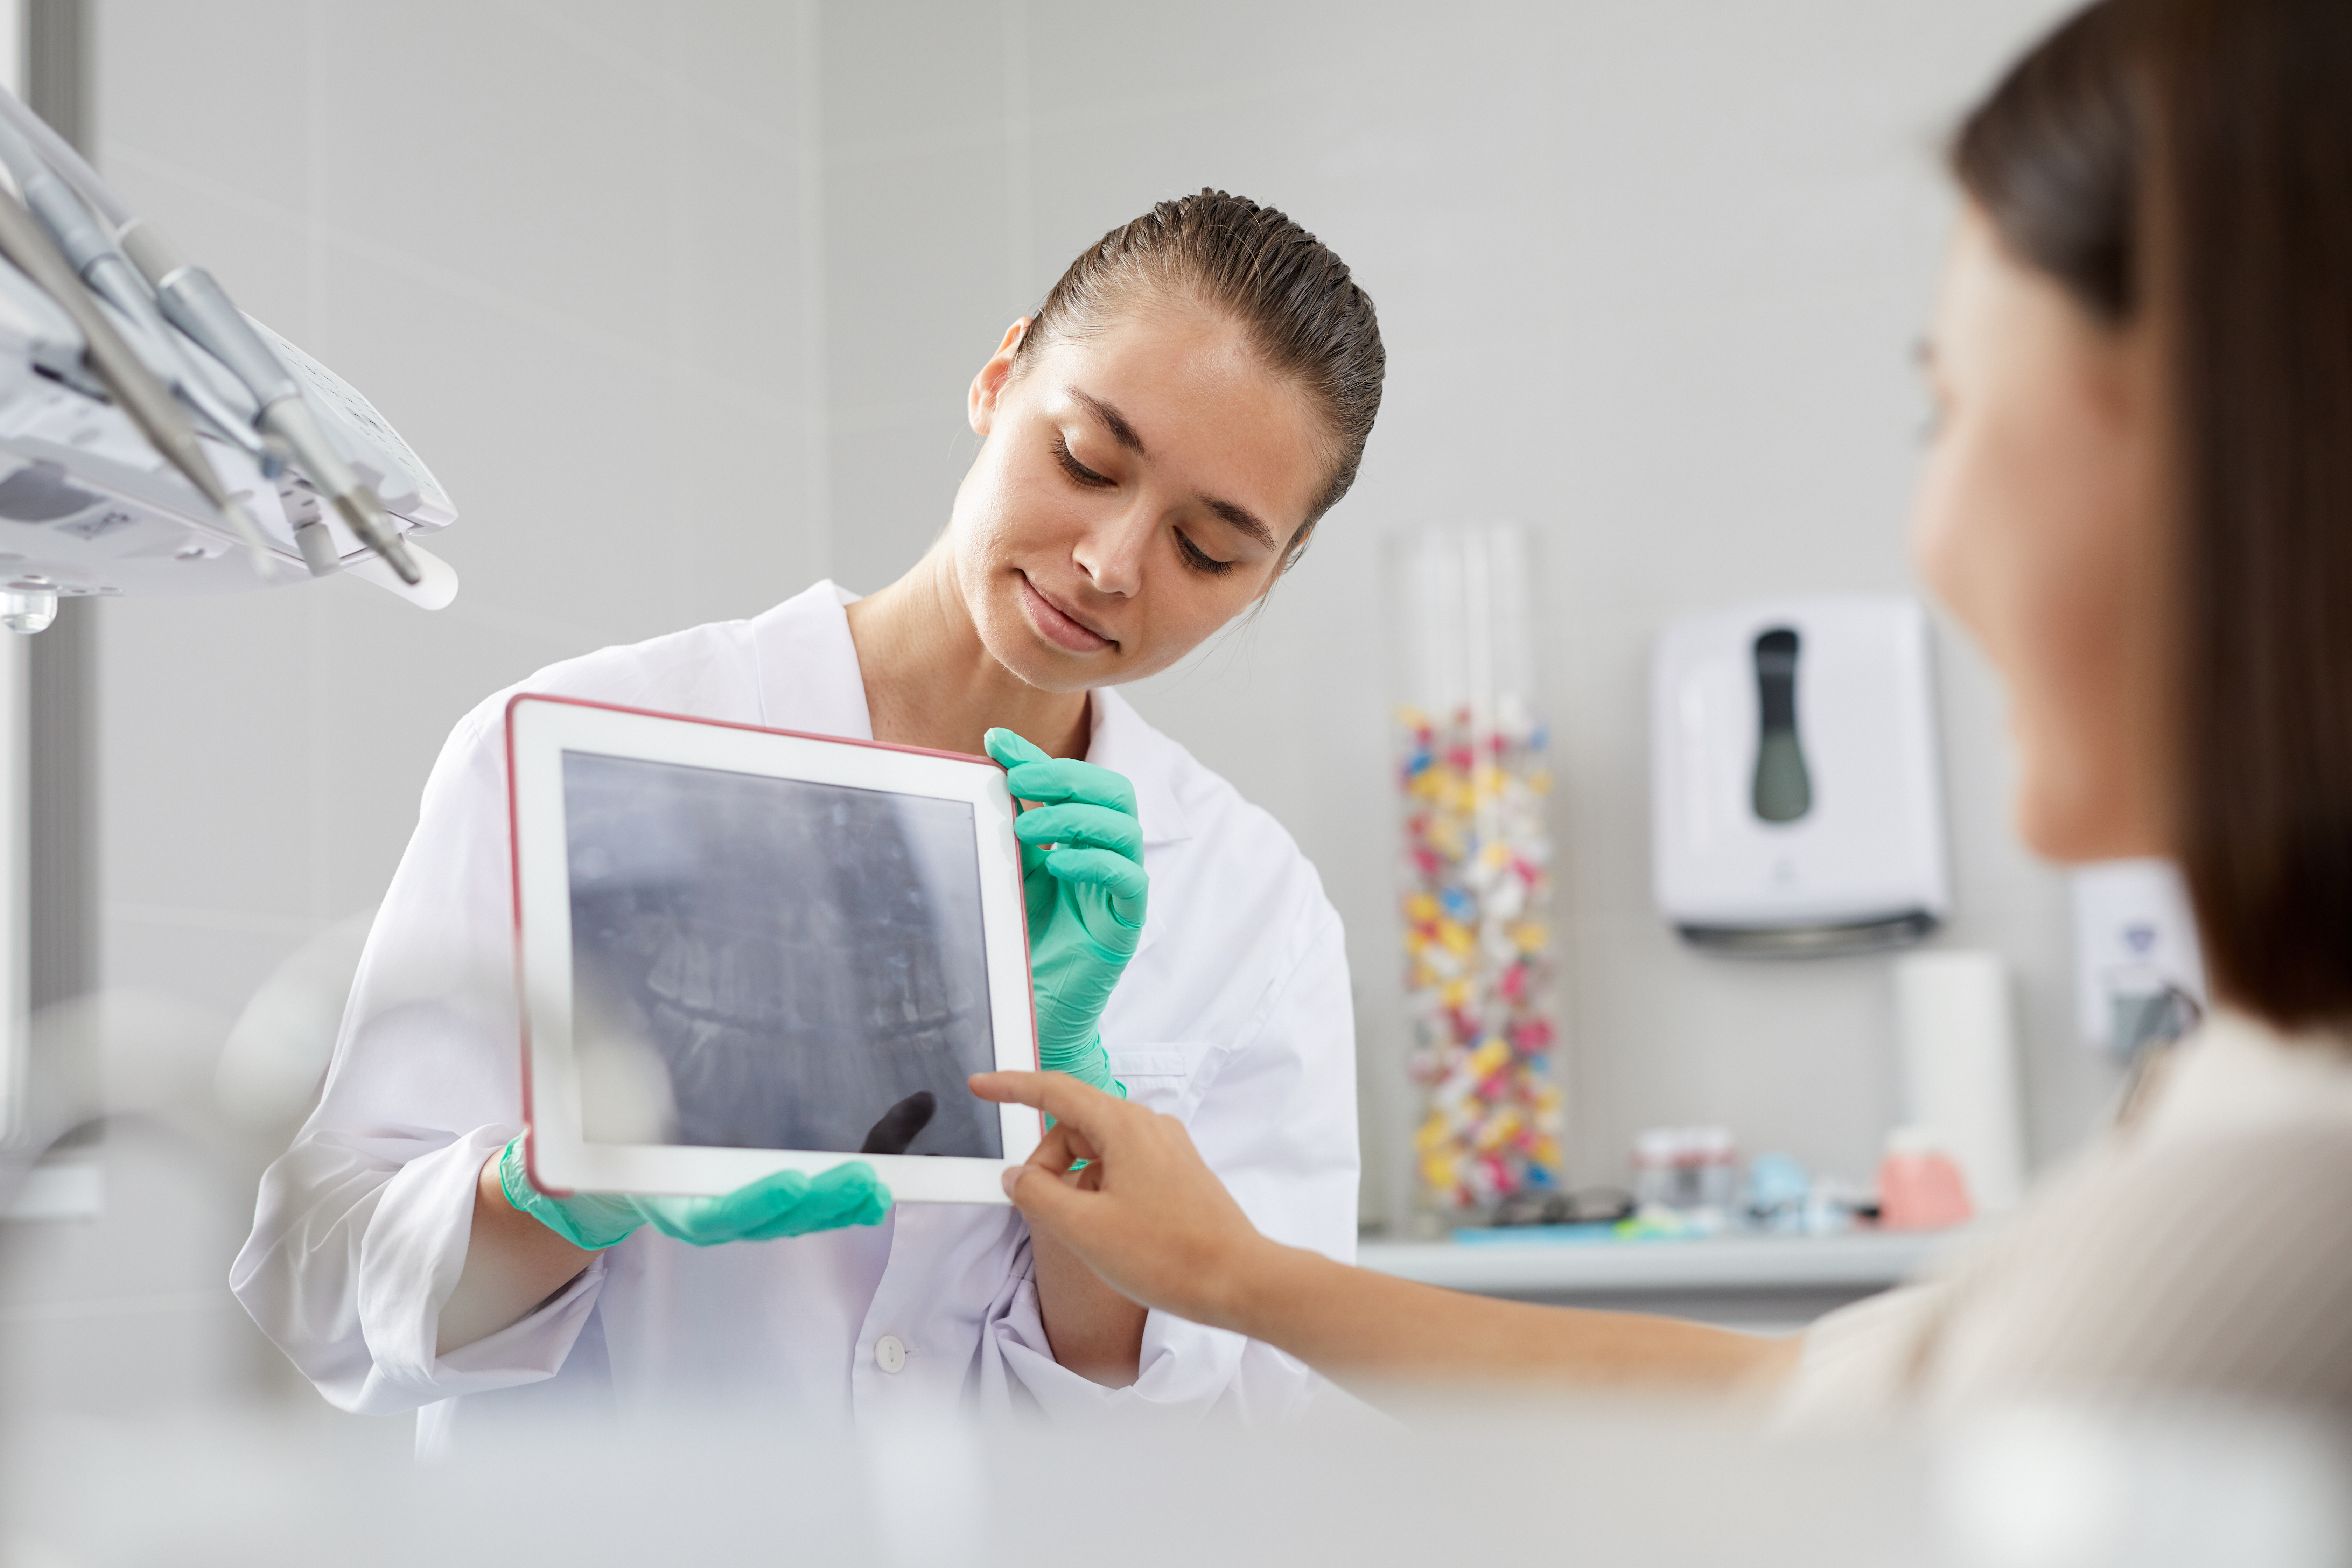 New Dental Technology Trends for 2022 - dentist shows x-ray on tablet